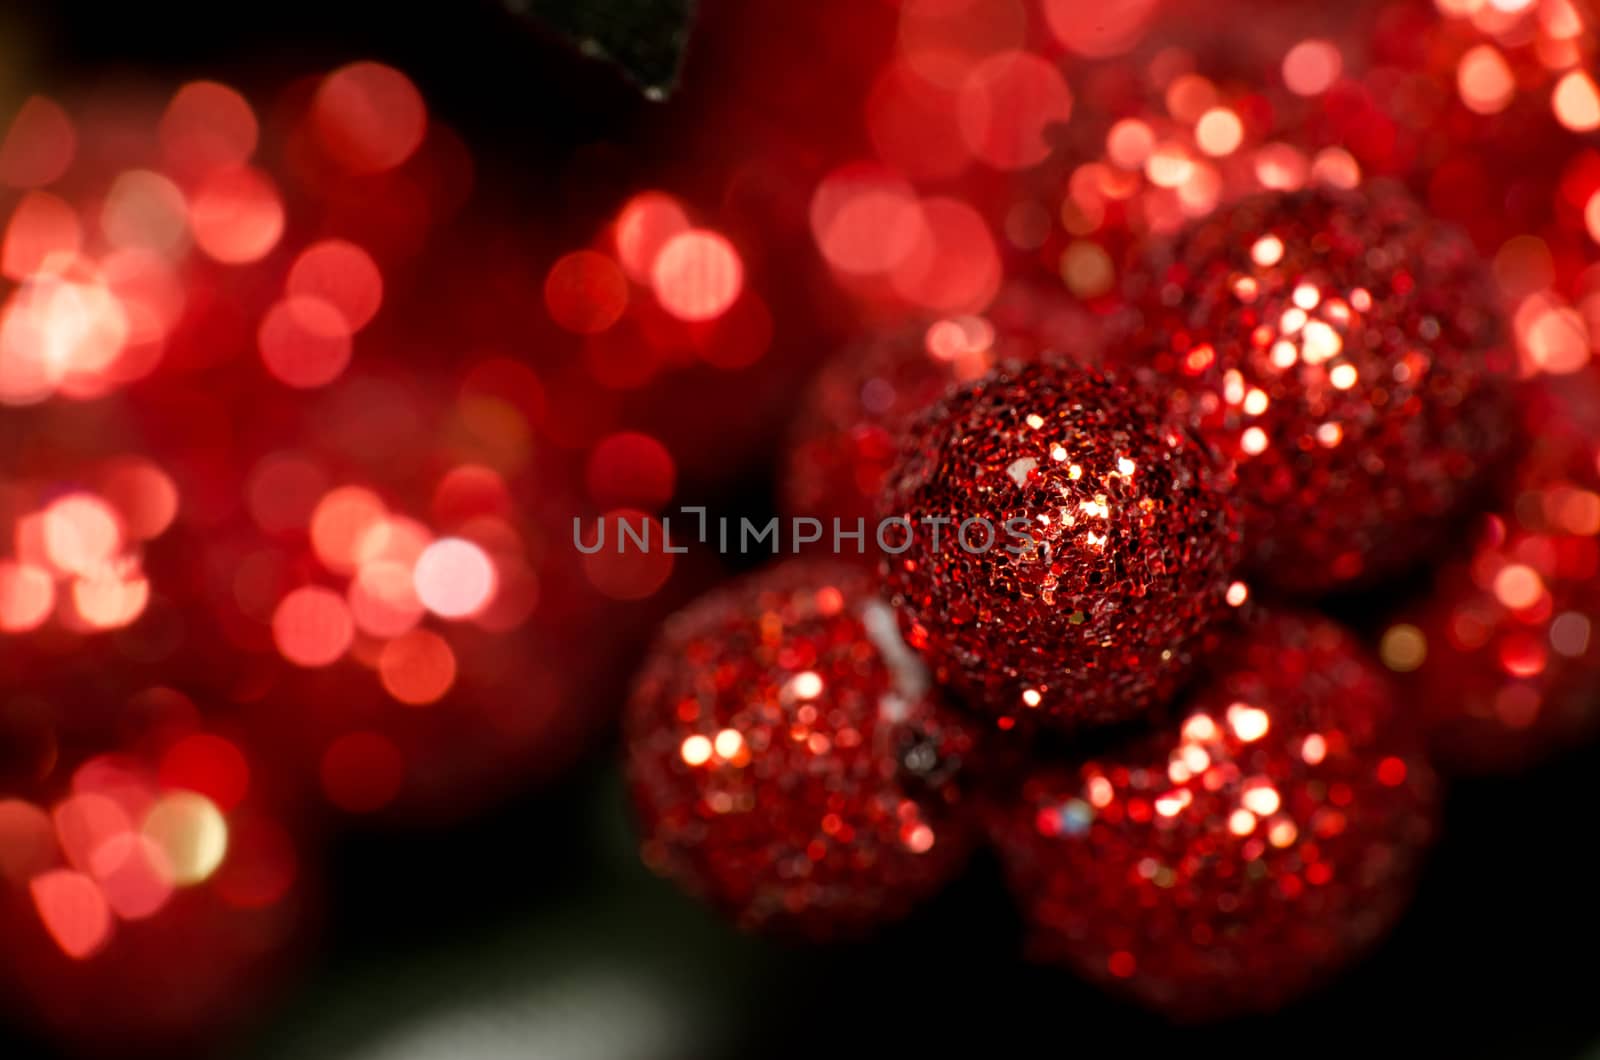 Christmas red shining baubles against red defocused background by Attila